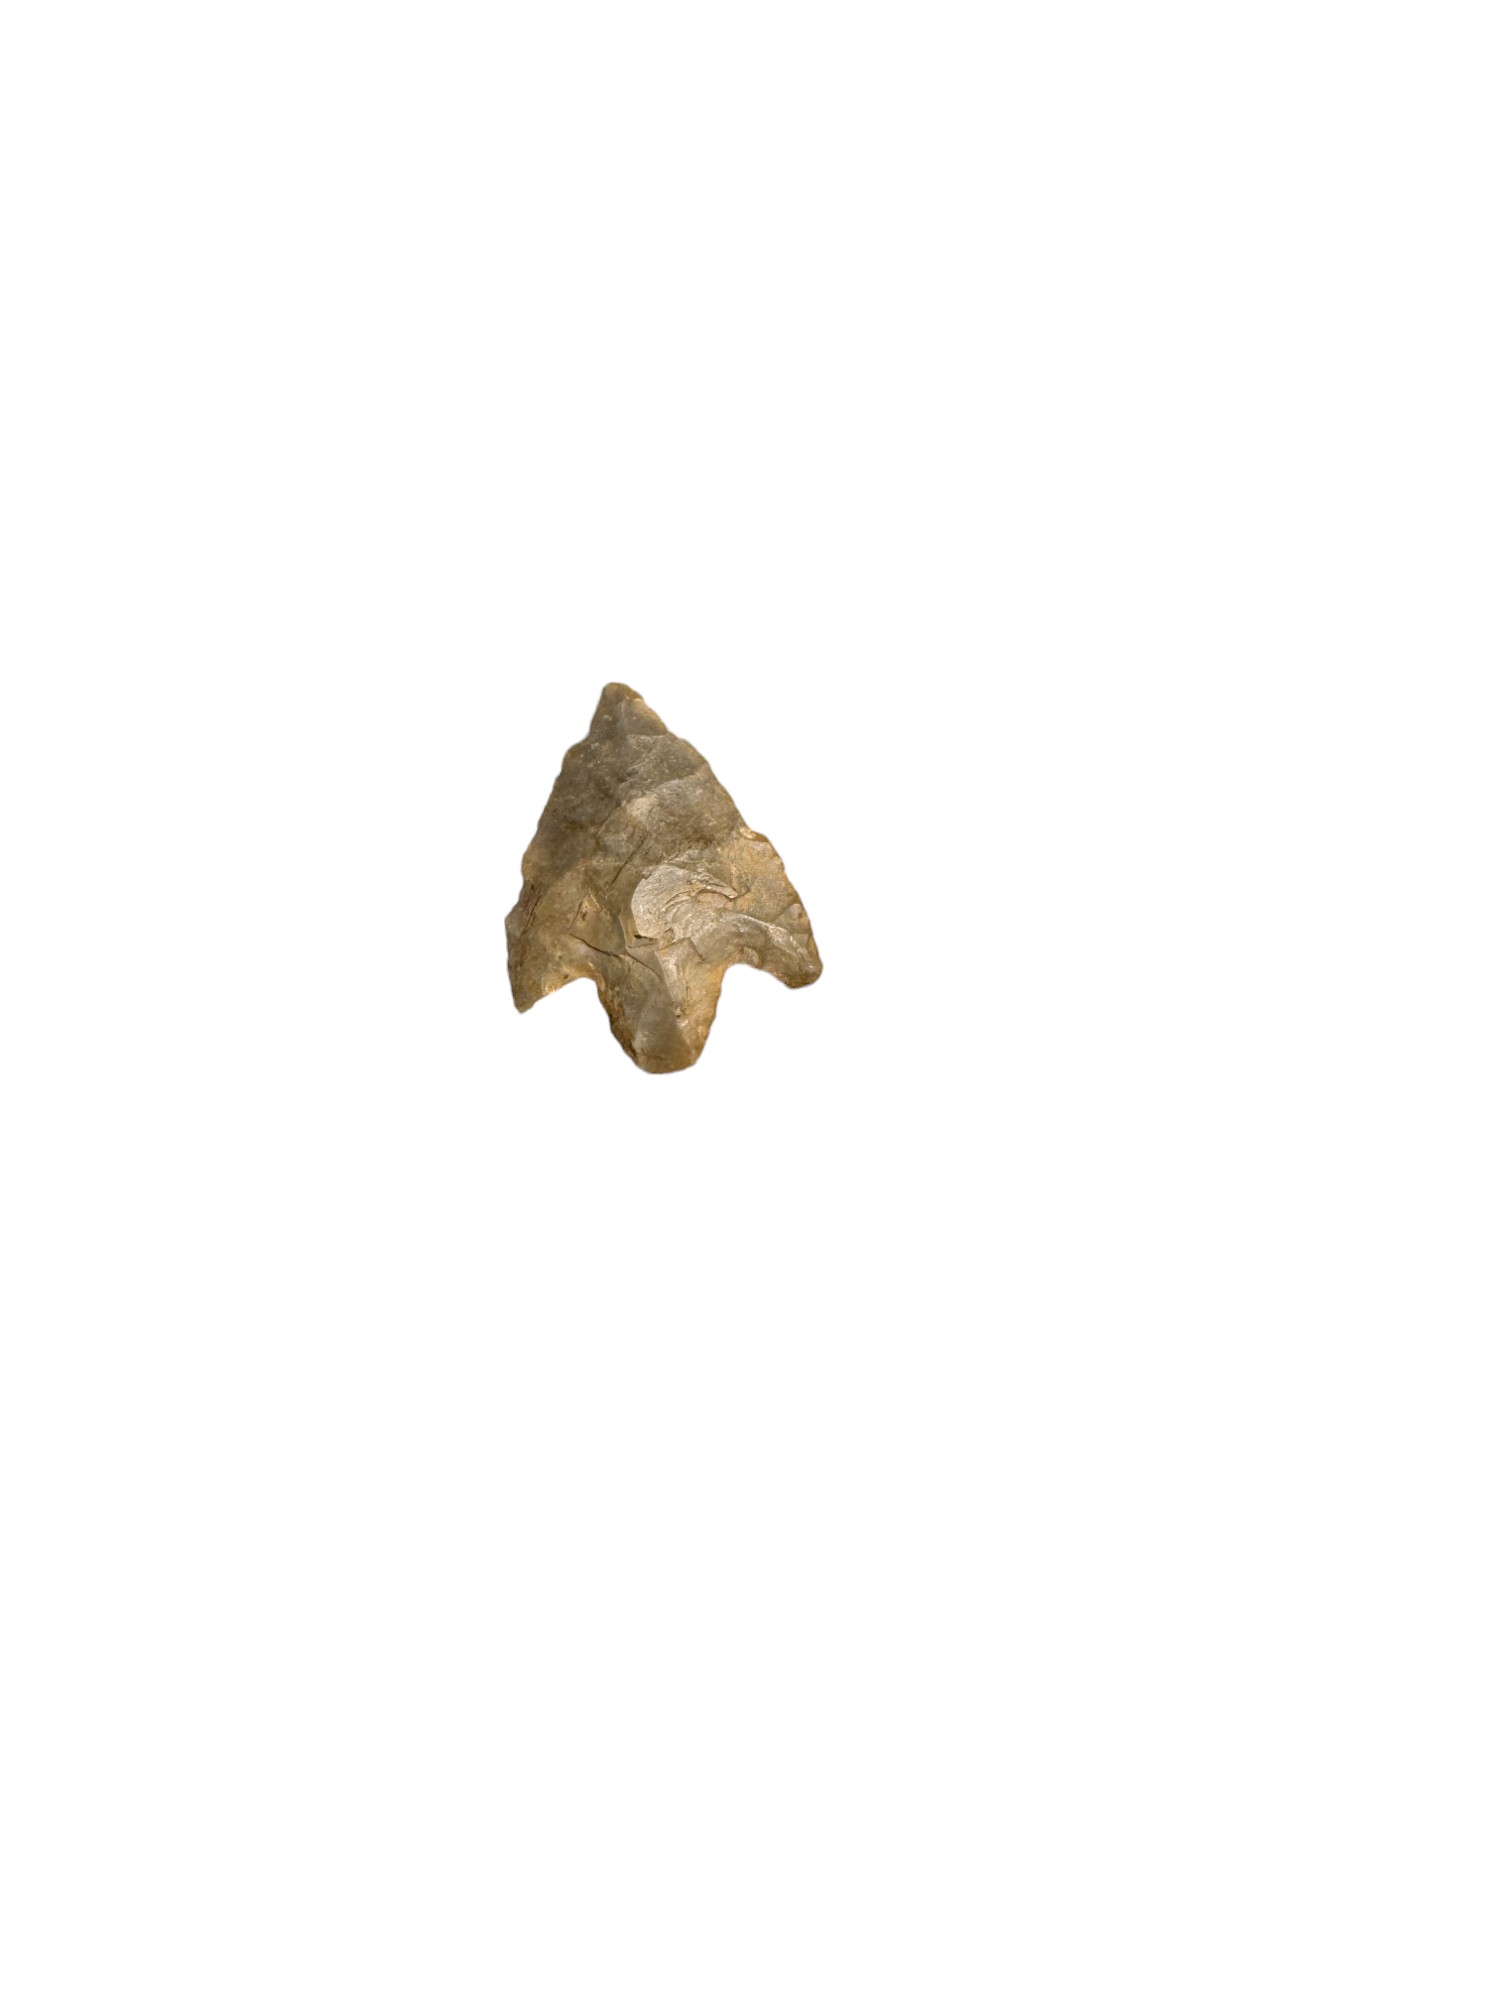 Antiquities: English Neolithic Stone Age Arrow Head, Yorkshire Find